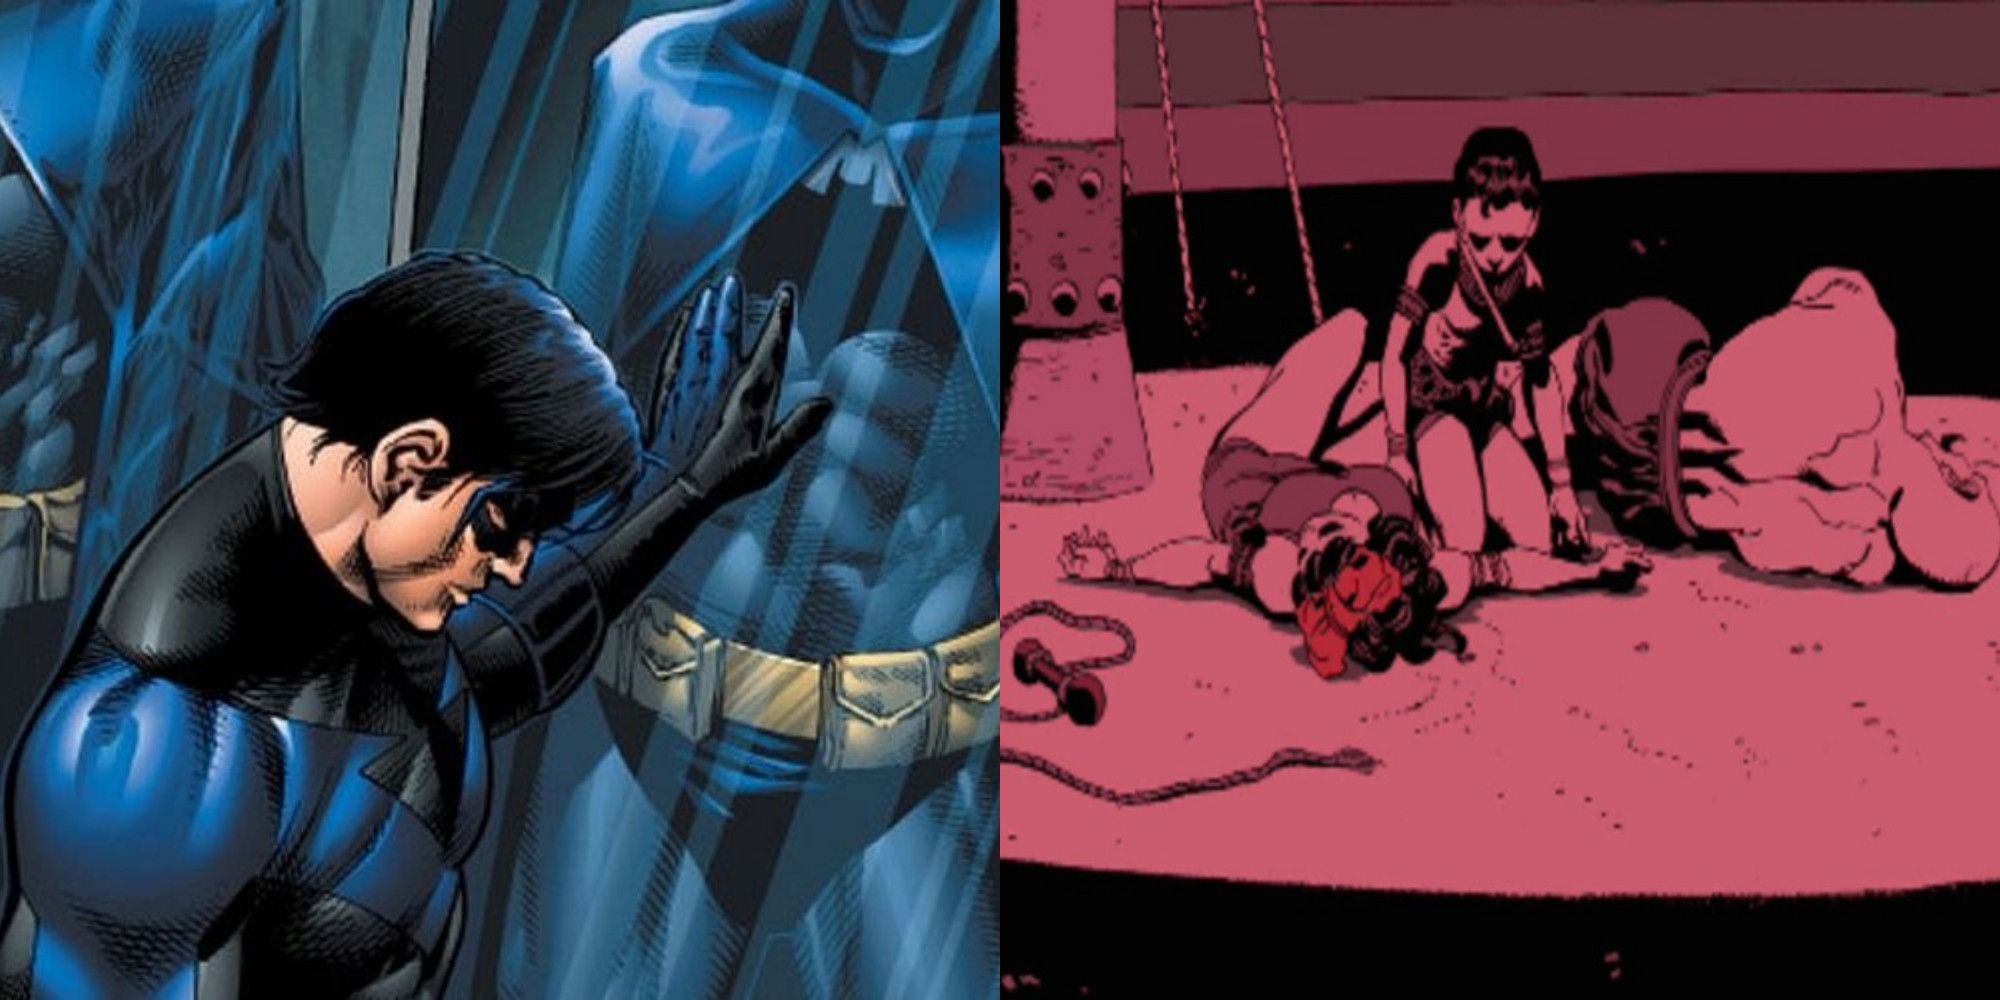 Nightwing: 10 Messed Up Things DC Has Done To Their Greatest Force For Good